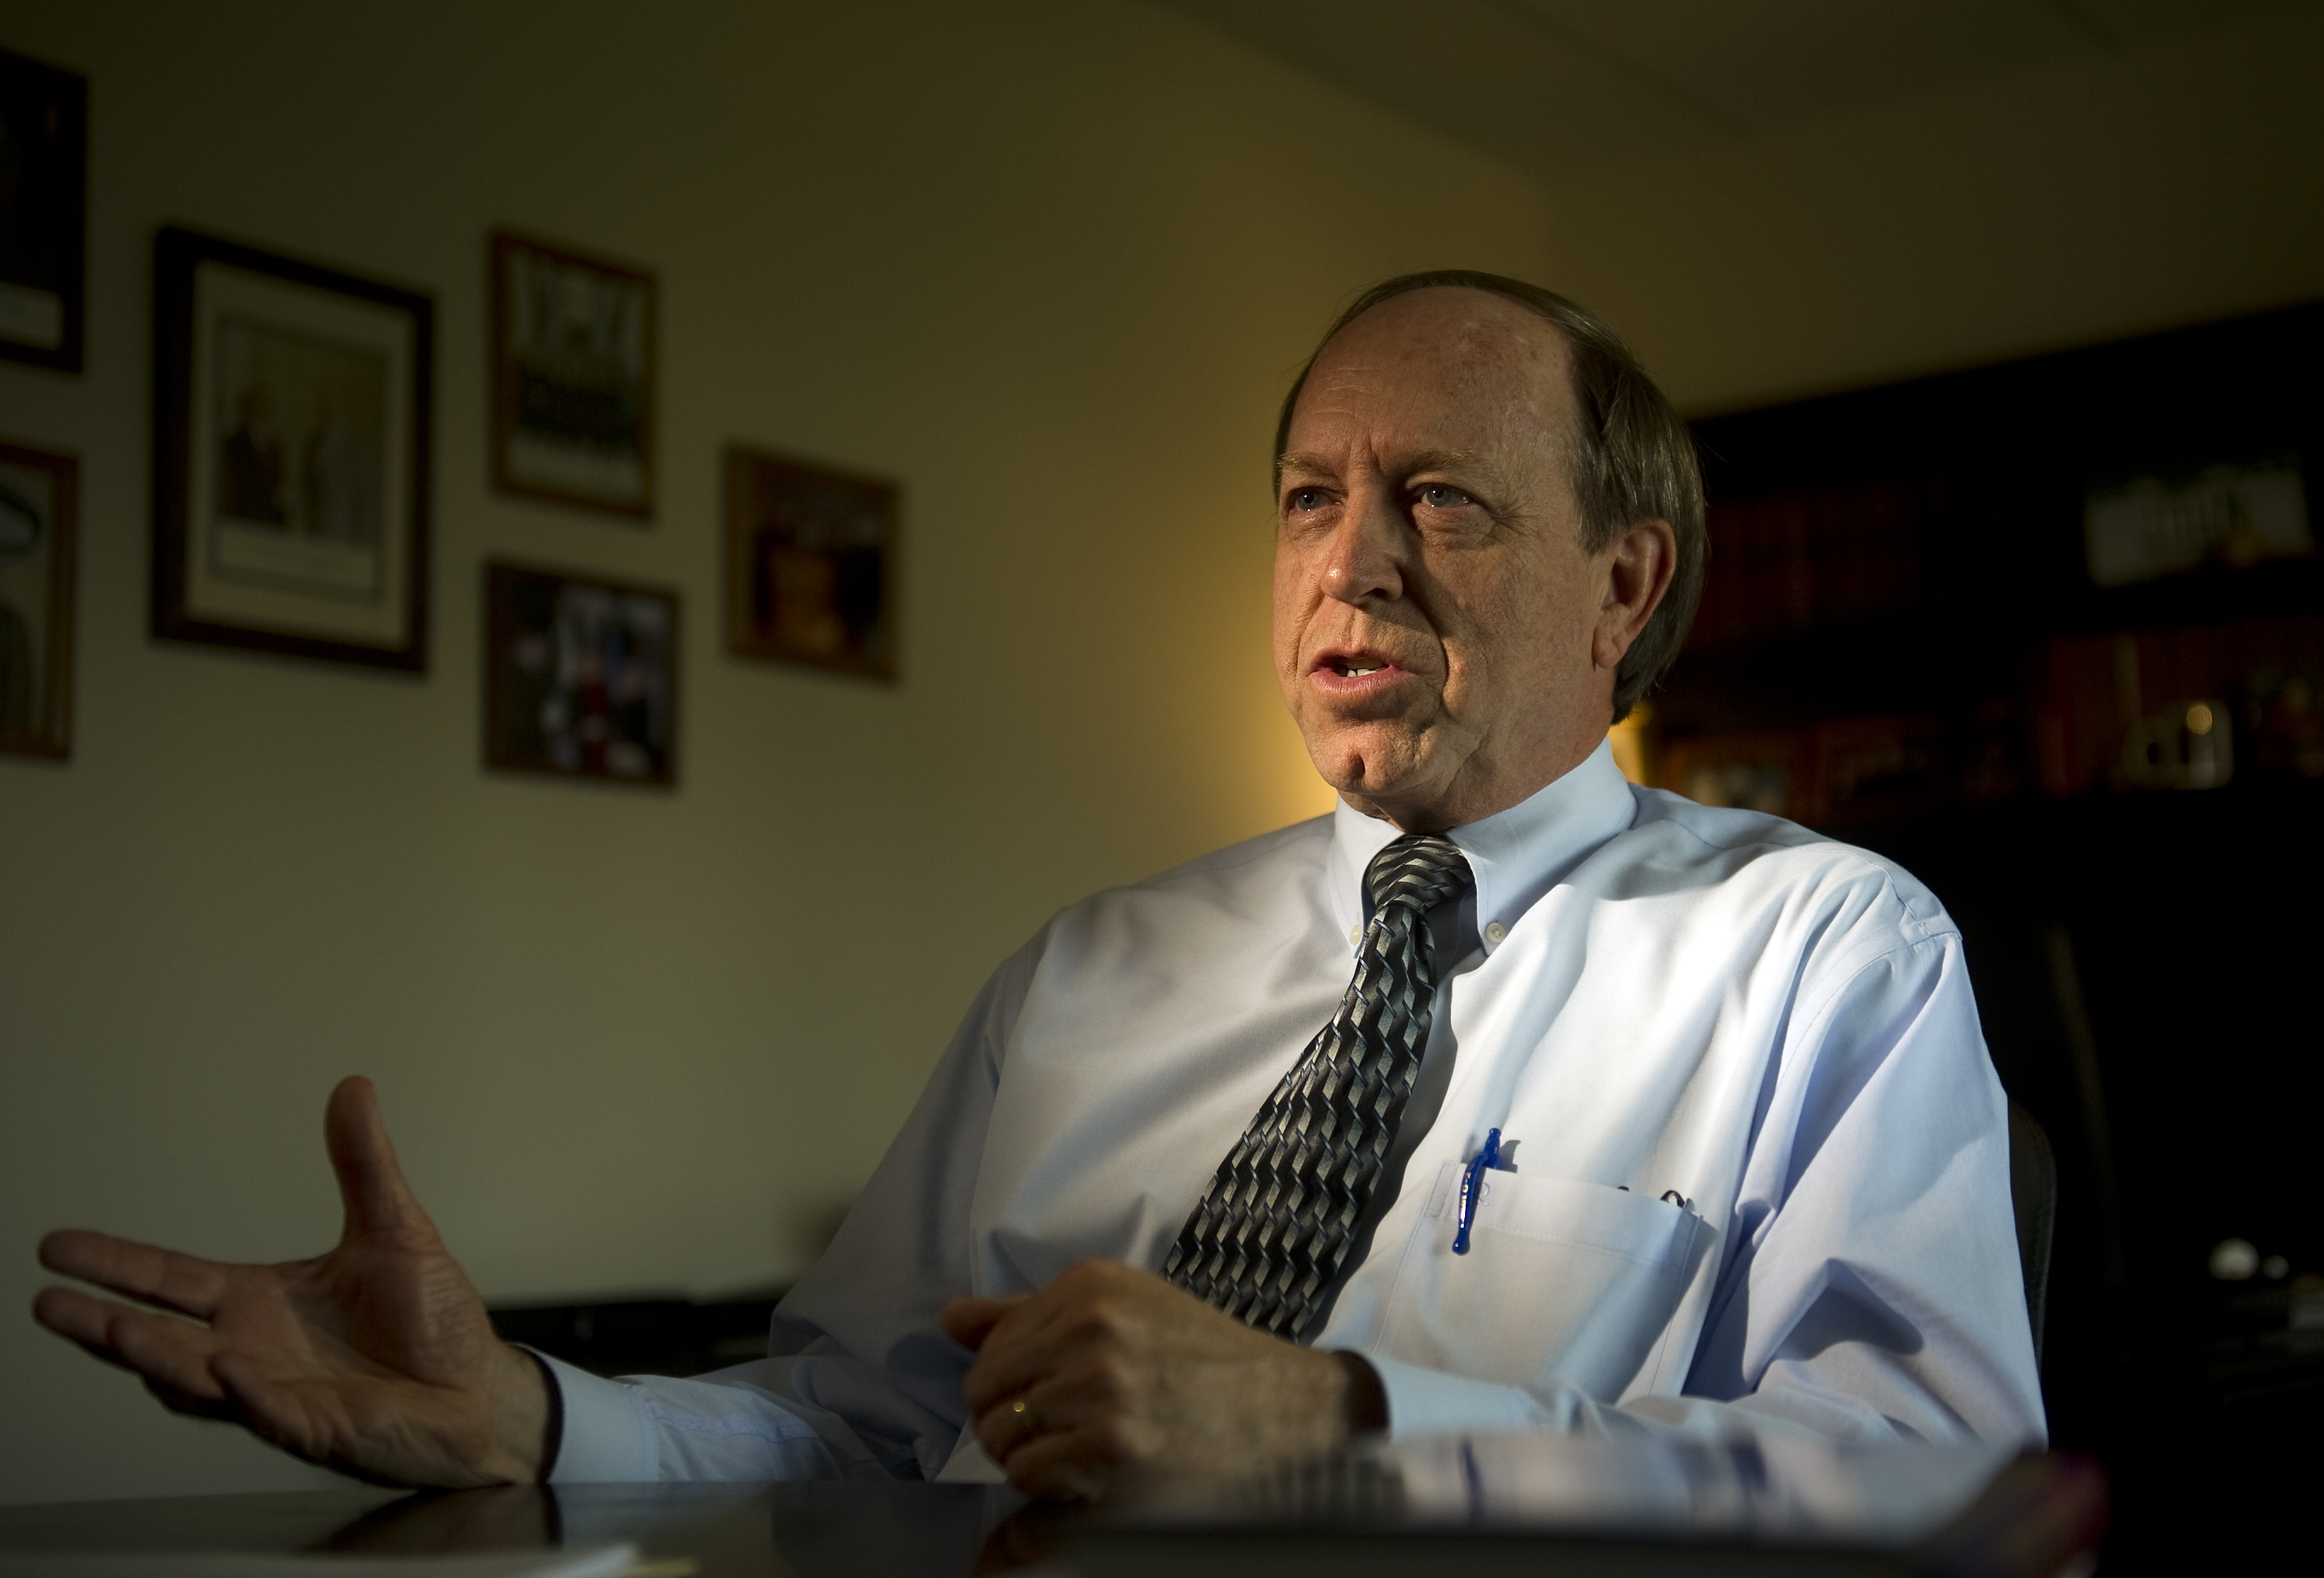 Colorado attorney general John Suthers in his office on Wednesday, May 23, 2012. (Cyrus McCrimmon—The Denver Post/Getty Images)